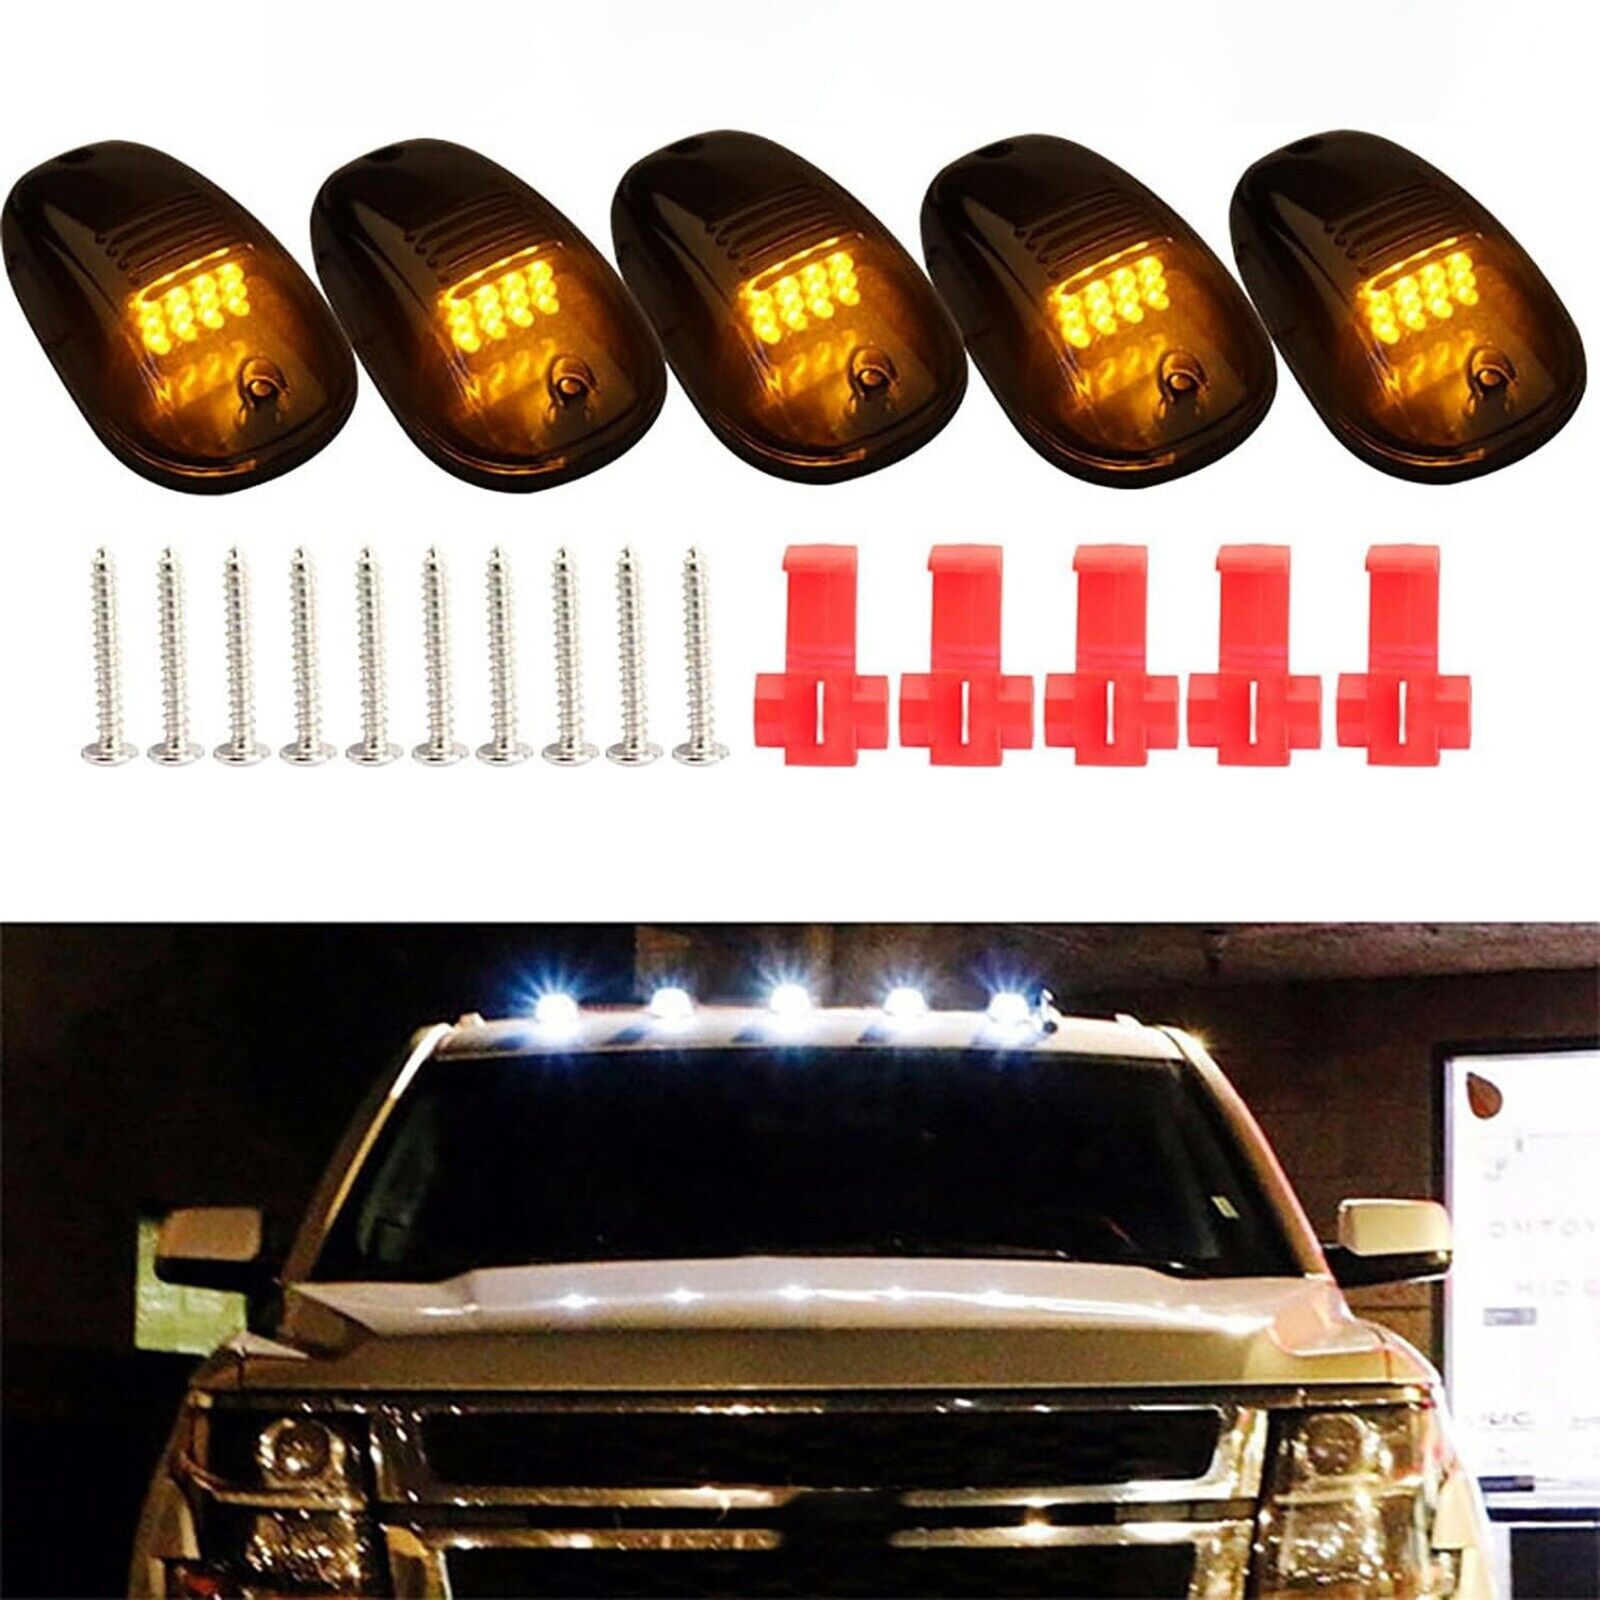  Cab Roof Lights Trucks Lights Roof Lights Screw Fixing Drilled Wired Power